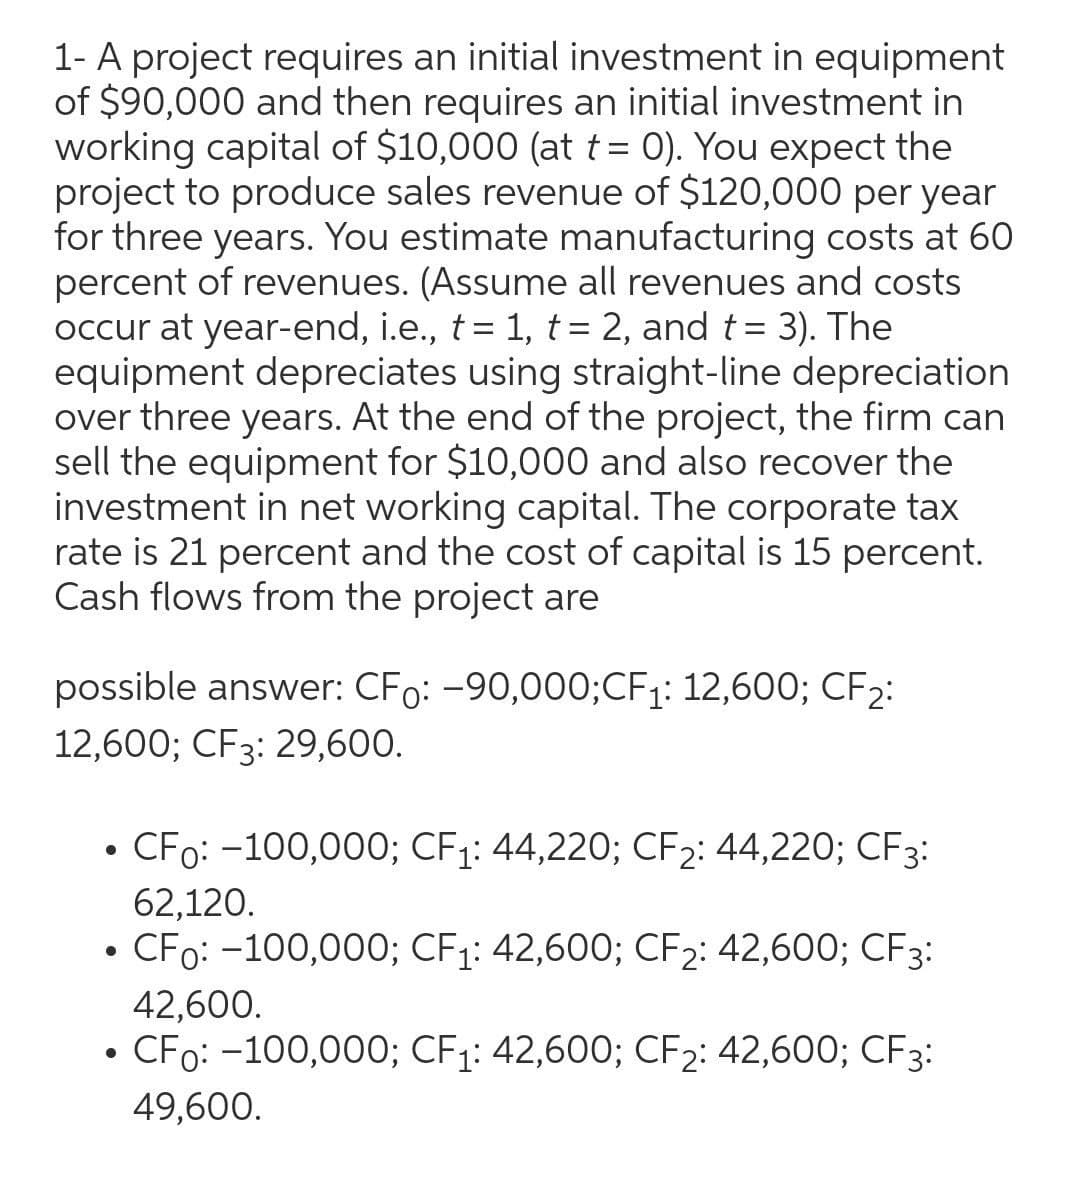 1- A project requires an initial investment in equipment
of $90,000 and then requires an initial investment in
working capital of $10,000 (at t = 0). You expect the
project to produce sales revenue of $120,000 per year
for three years. You estimate manufacturing costs at 60
percent of revenues. (Assume all revenues and costs
occur at year-end, i.e., t = 1, t= 2, and t= 3). The
equipment depreciates using straight-line depreciation
over three years. At the end of the project, the firm can
sell the equipment for $10,000 and also recover the
investment in net working capital. The corporate tax
rate is 21 percent and the cost of capital is 15 percent.
Cash flows from the project are
%3D
possible answer: CFo: -90,000;CF1: 12,600; CF2:
12,600; CF3: 29,600.
CFo: -100,000; CF1: 44,220; CF2: 44,220; CF3:
62,120.
CFo: -100,000; CF1: 42,600; CF2: 42,600; CF3:
42,600.
• CFo: -100,000; CF1: 42,600; CF2: 42,600; CF3:
49,600.
